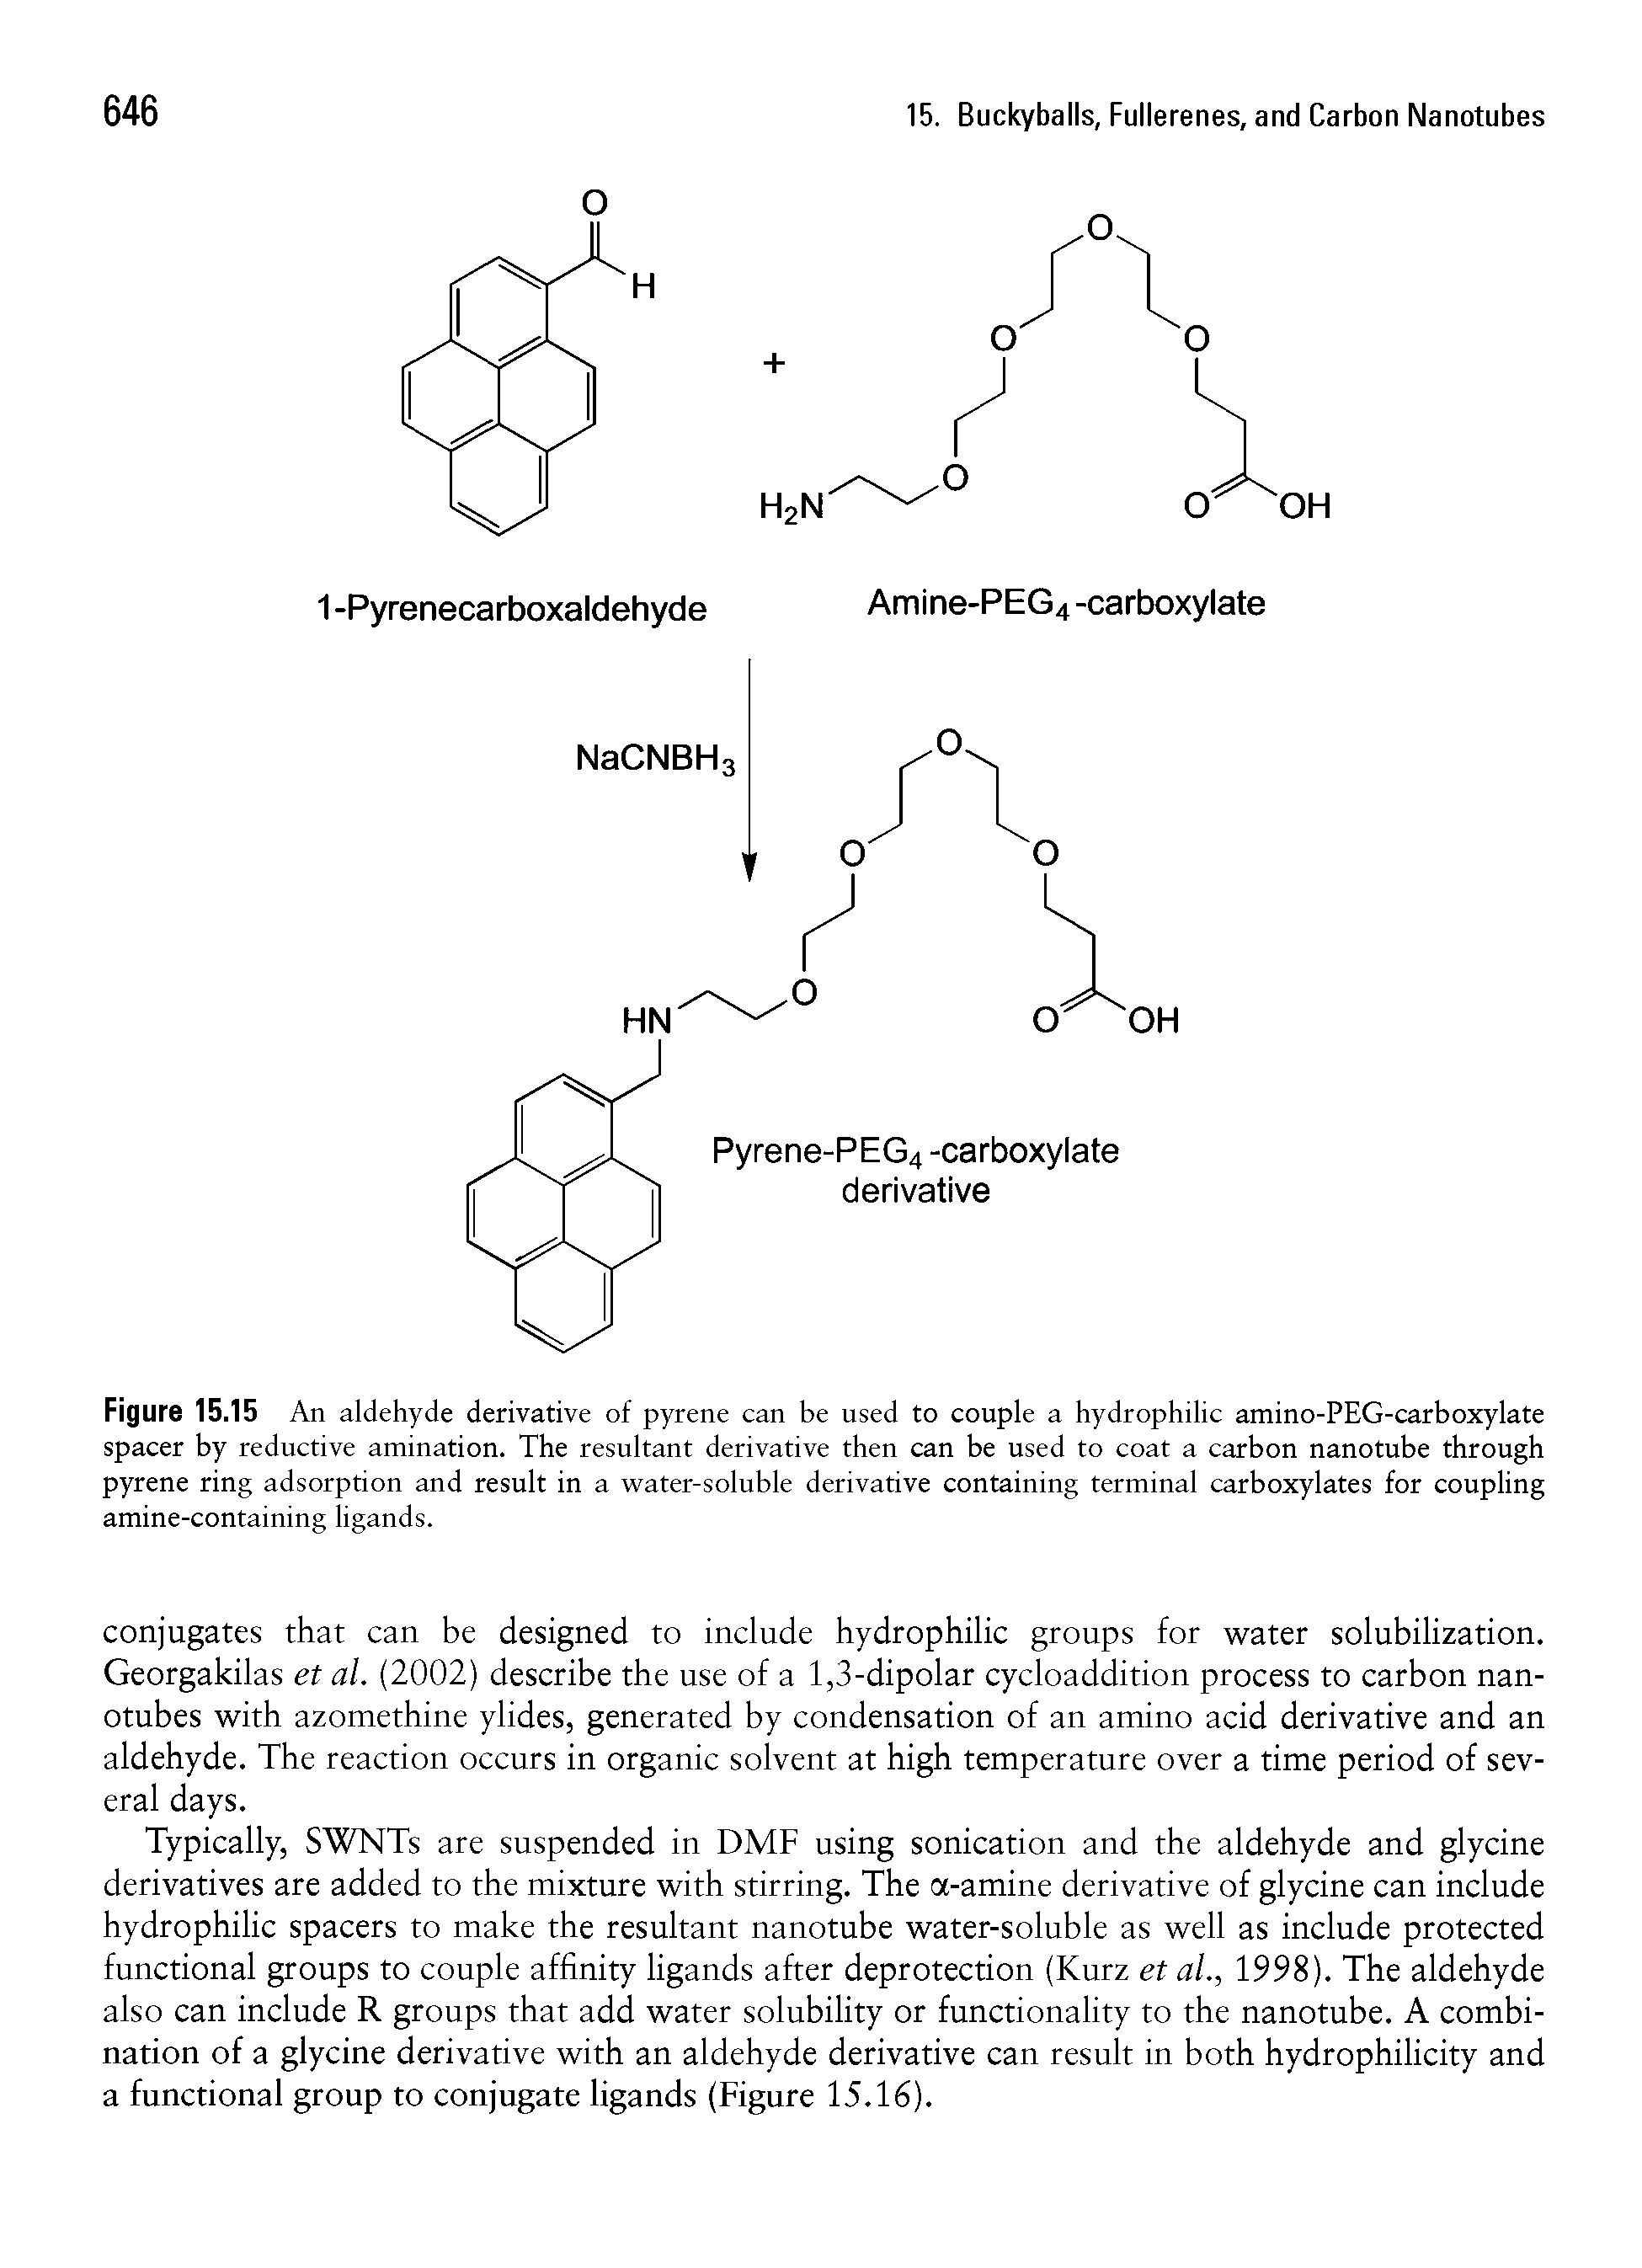 Figure 15.15 An aldehyde derivative of pyrene can be used to couple a hydrophilic amino-PEG-carboxylate spacer by reductive amination. The resultant derivative then can be used to coat a carbon nanotube through pyrene ring adsorption and result in a water-soluble derivative containing terminal carboxylates for coupling amine-containing ligands.